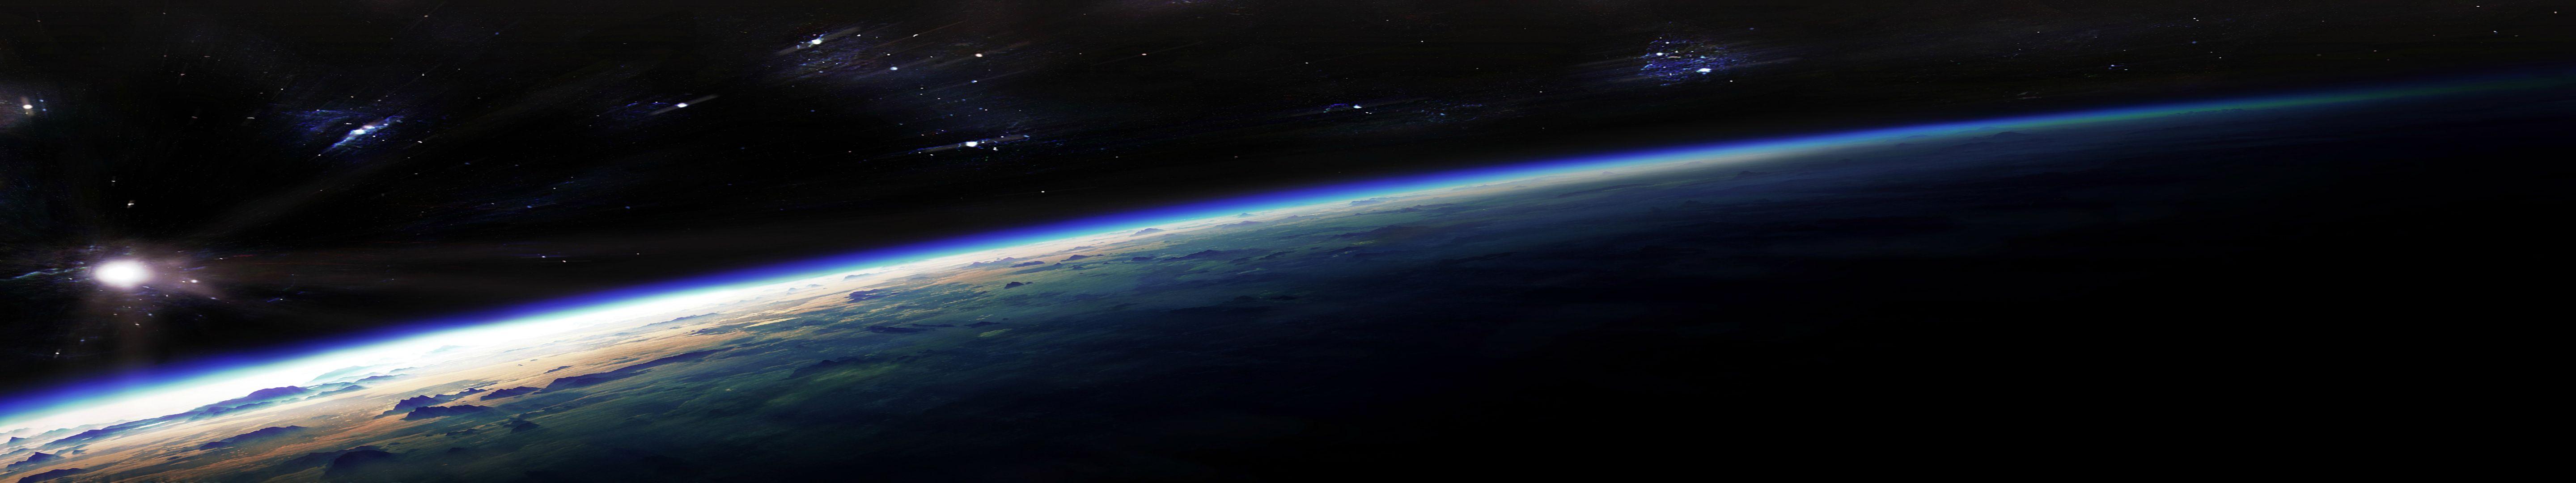 5760 X 2160 Space Wallpapers - Top Free